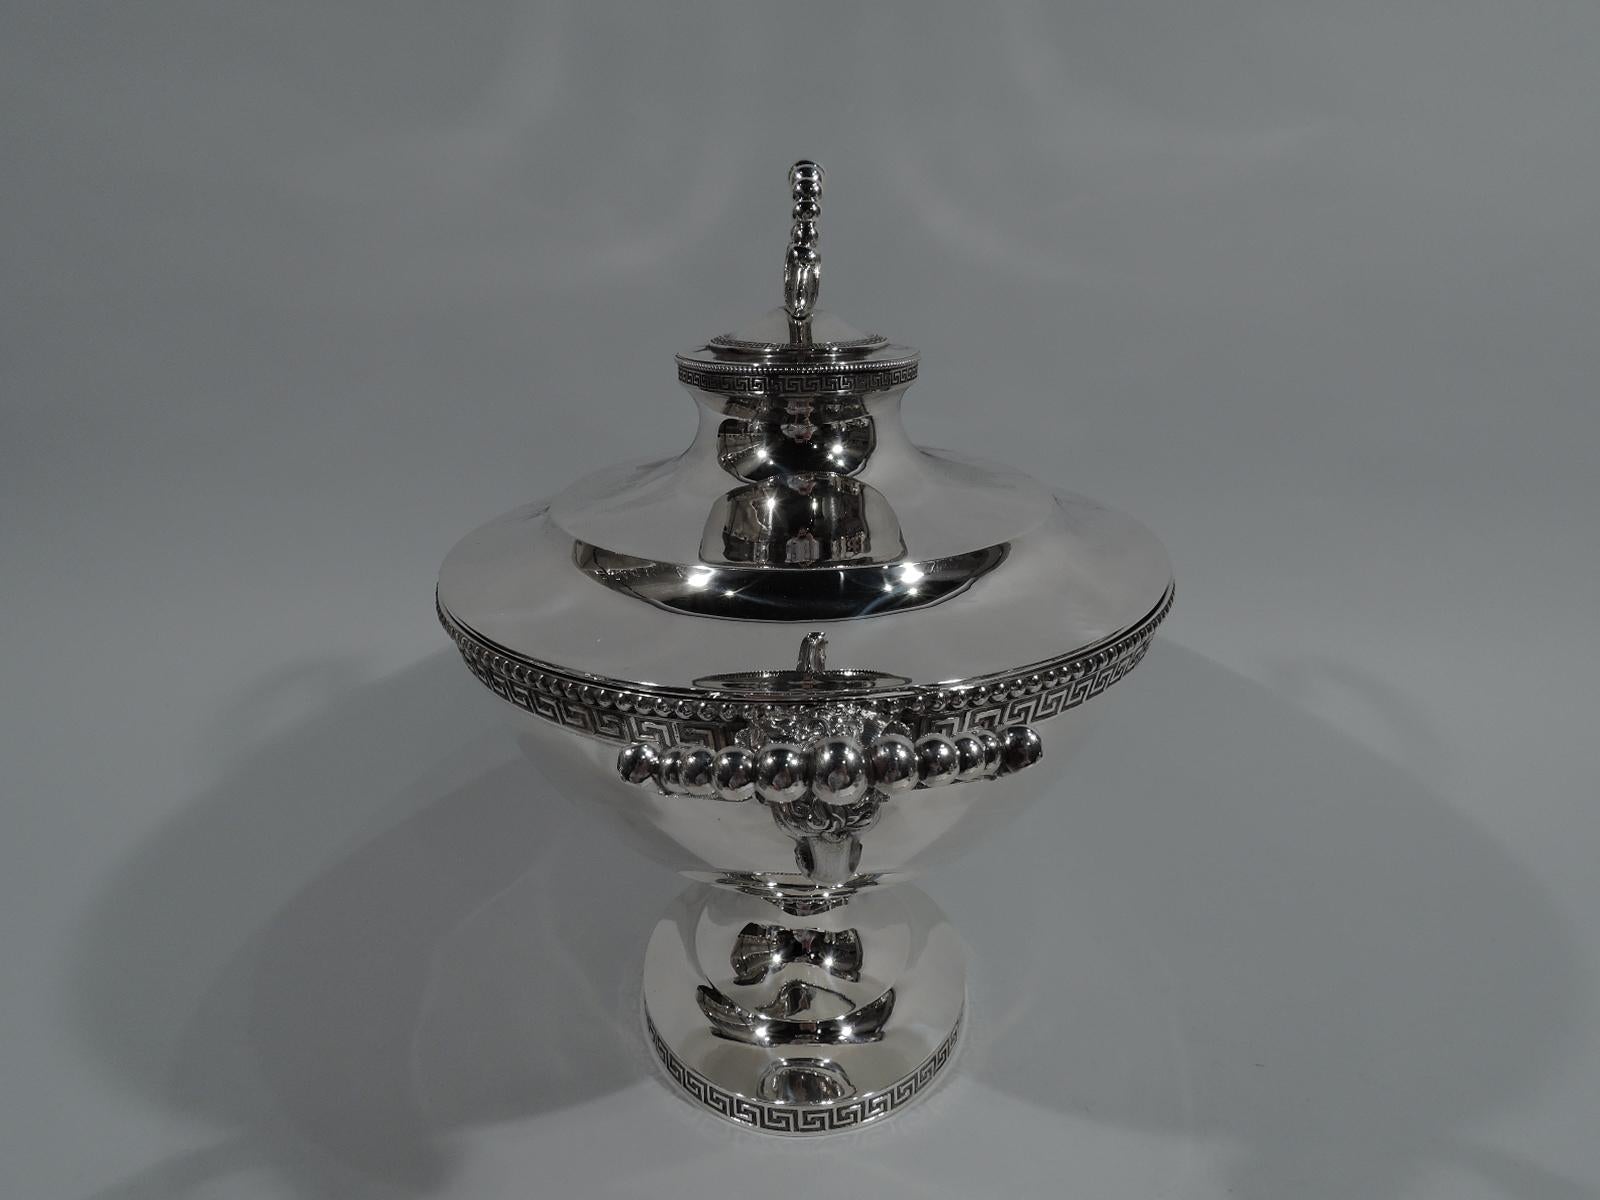 Greek Revival sterling silver soup tureen. Made by John C. Moore for Tiffany & Co. at 550 Broadway, New York. Ovoid bowl has leafy-ring end handles with graduated beading fix-mounted to cast ram’s heads. Cover stepped and domed with same.